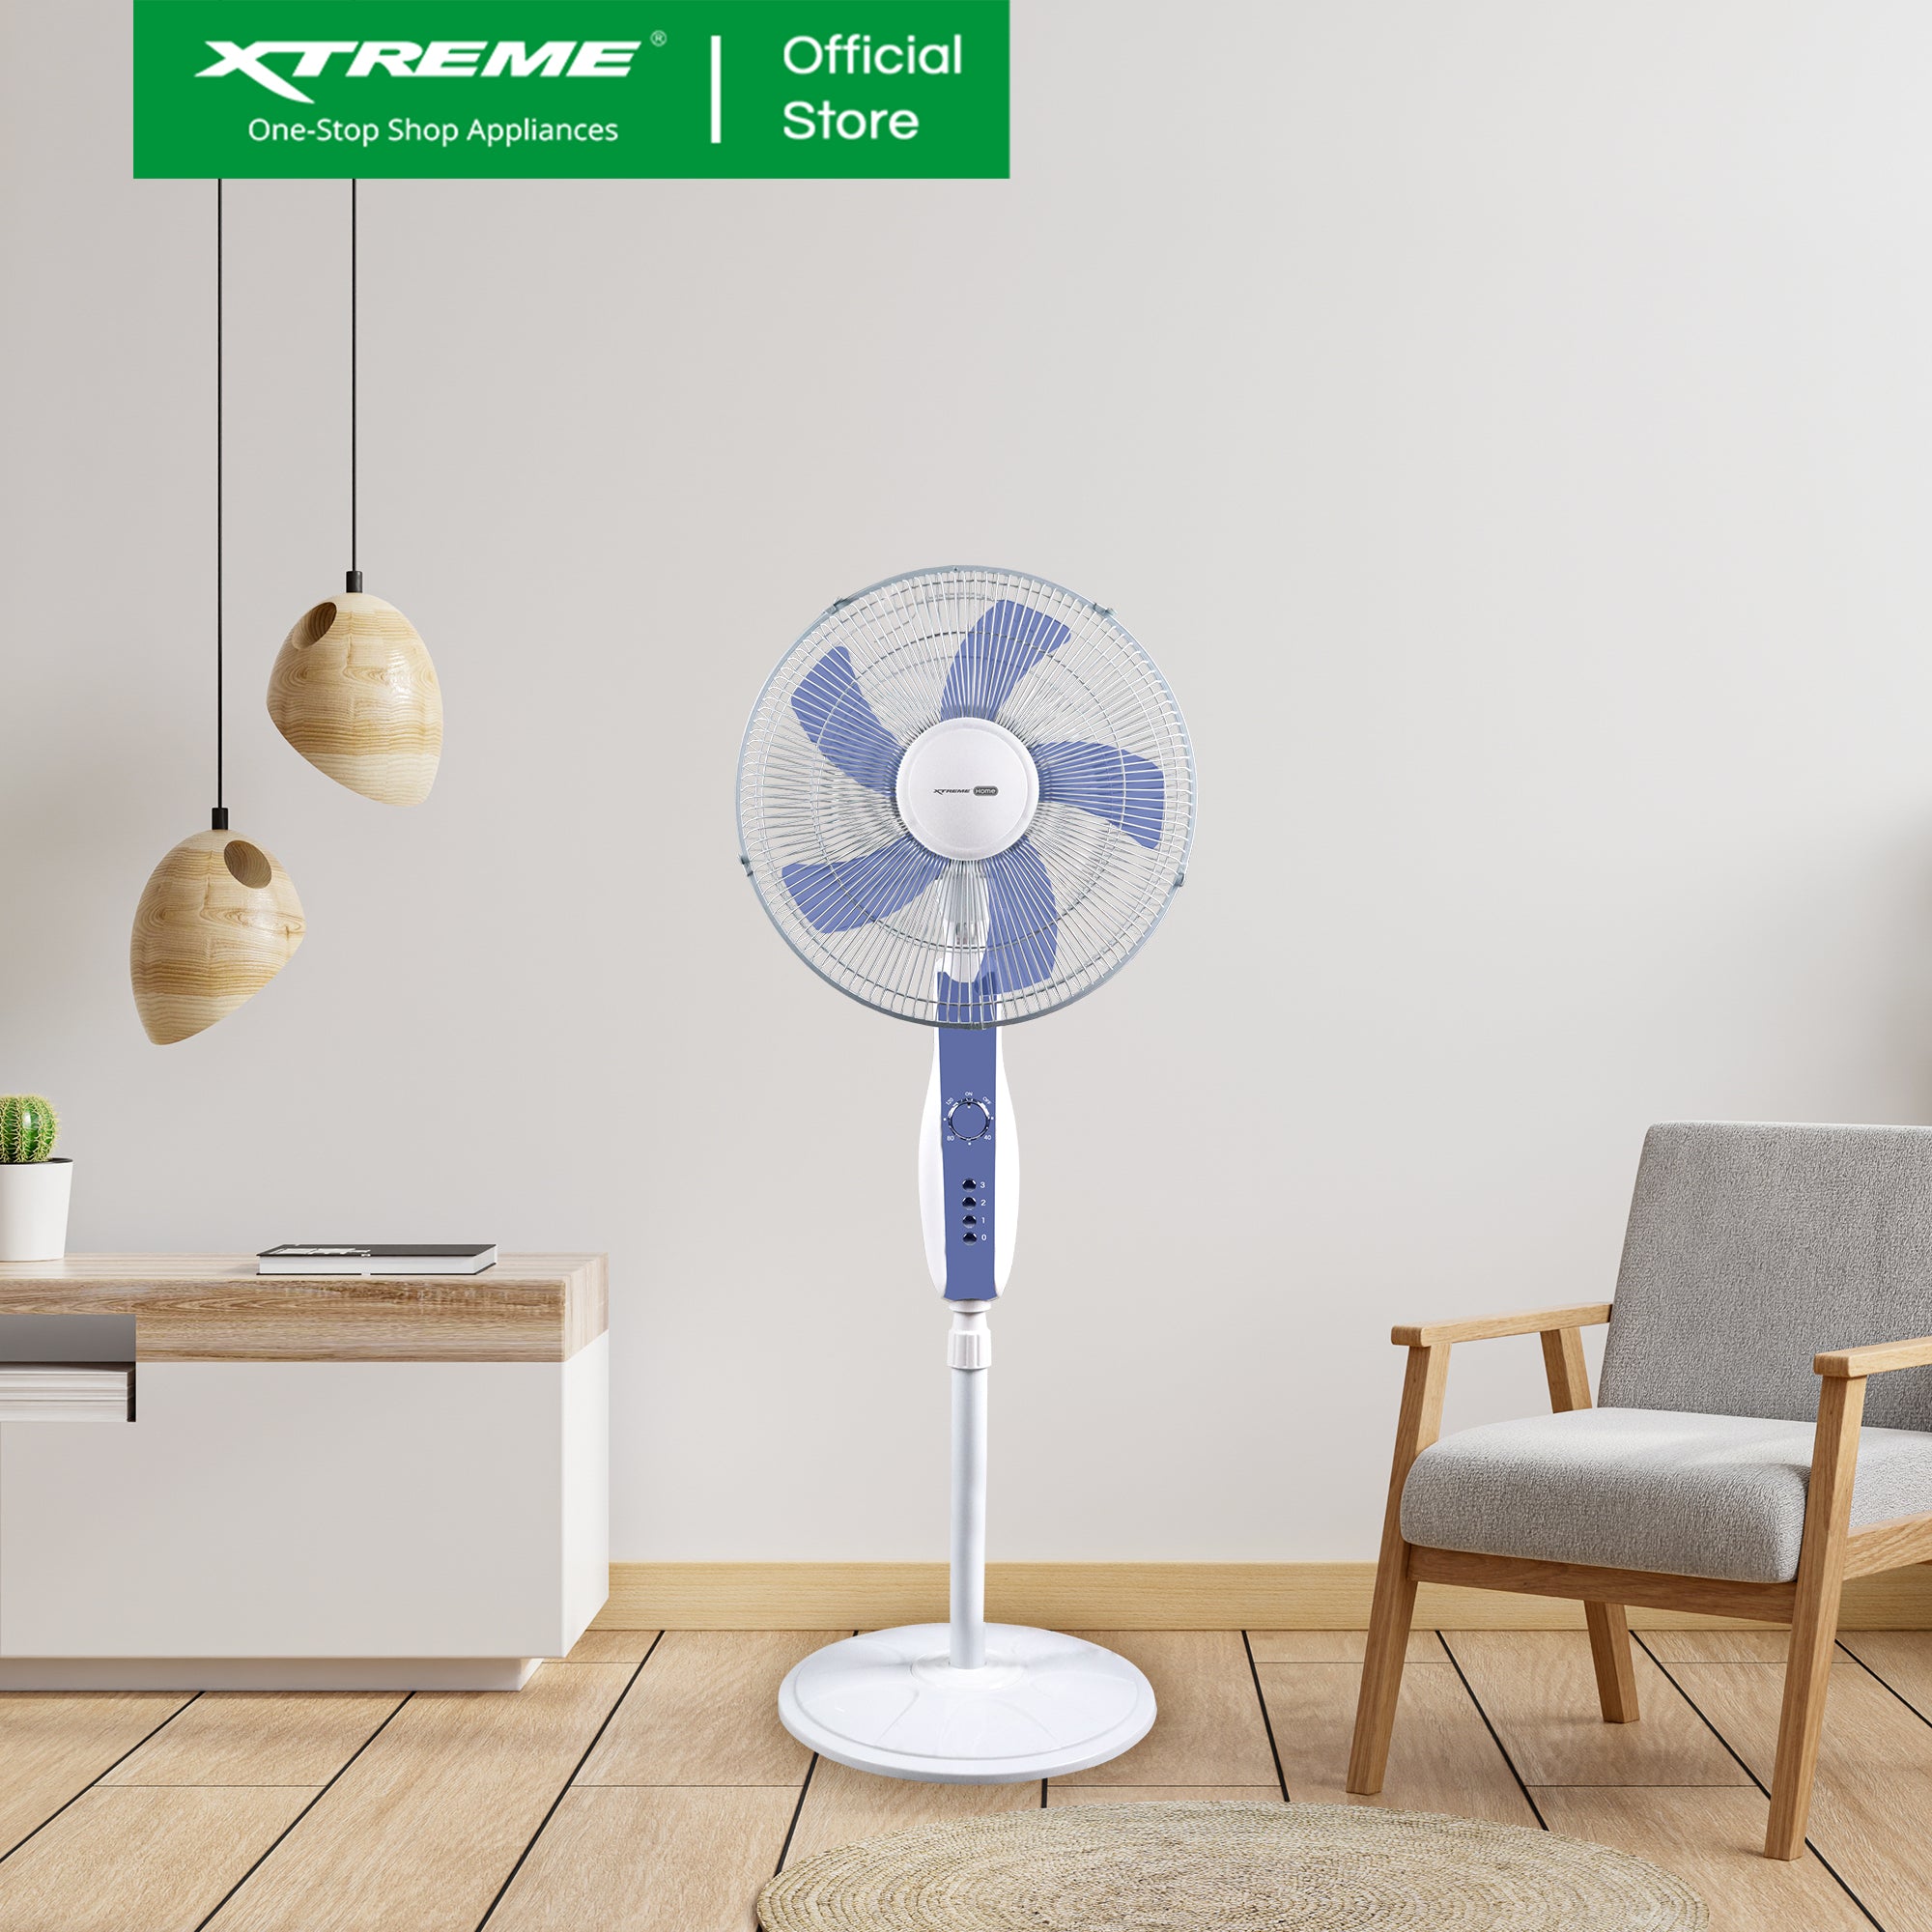 16" XTREME HOME Stand Fan (Blue) | XH-EF-SF16BLUE